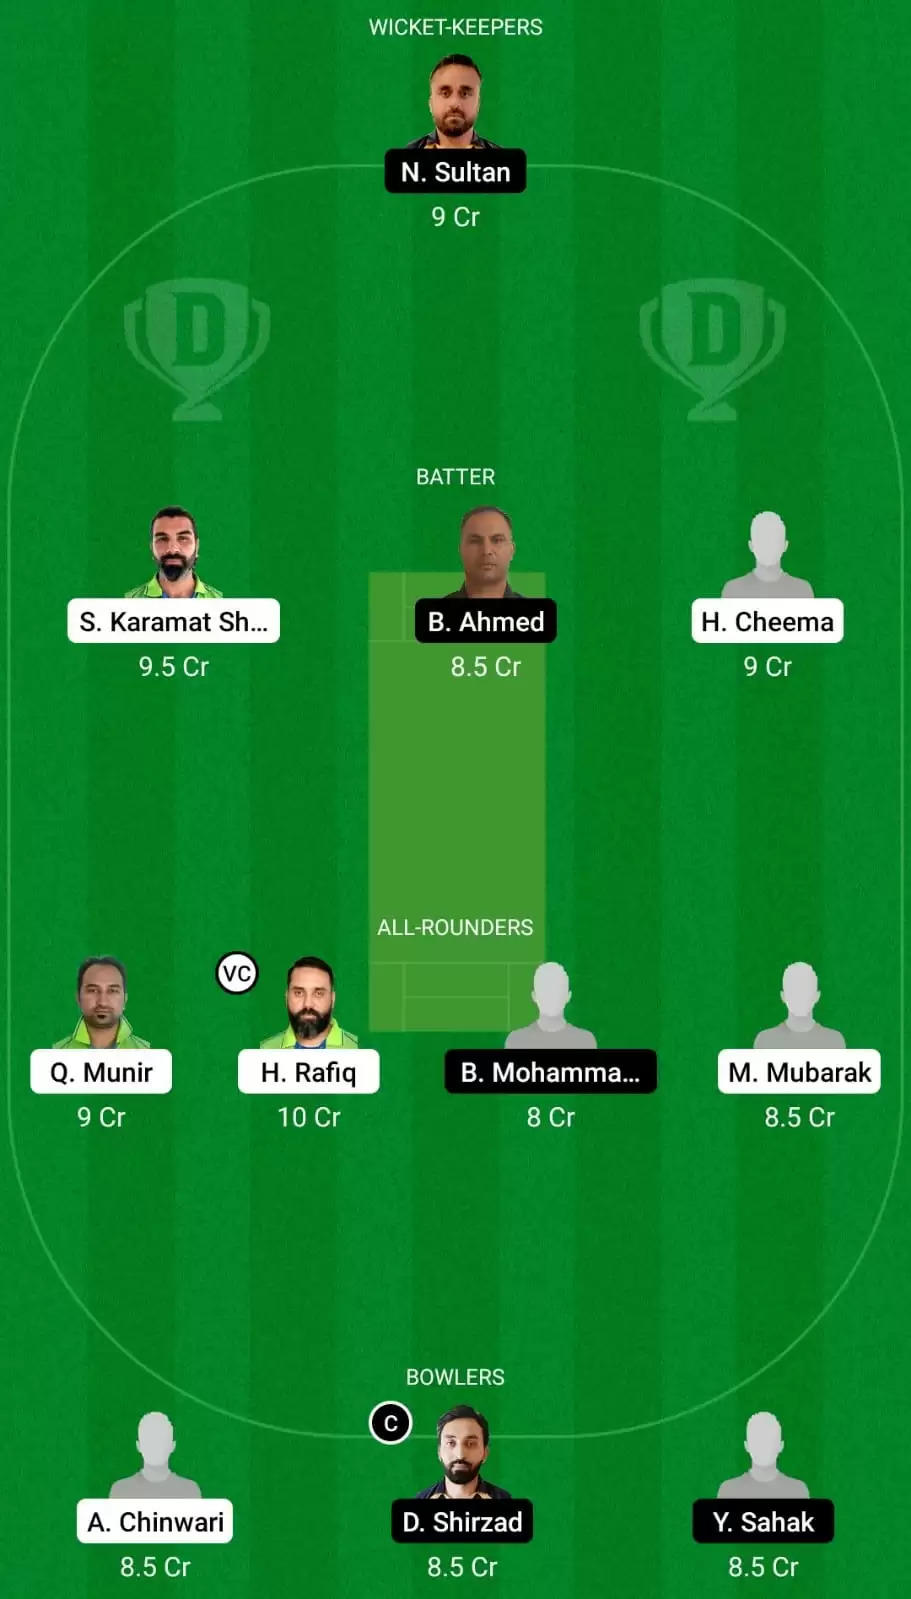 MAL vs ARI Dream11 Team Prediction for ECS T10 Malmo 2021: Malmo vs Ariana CC Best Fantasy Cricket Tips, Strongest Playing XI, Pitch Report and Player Updates